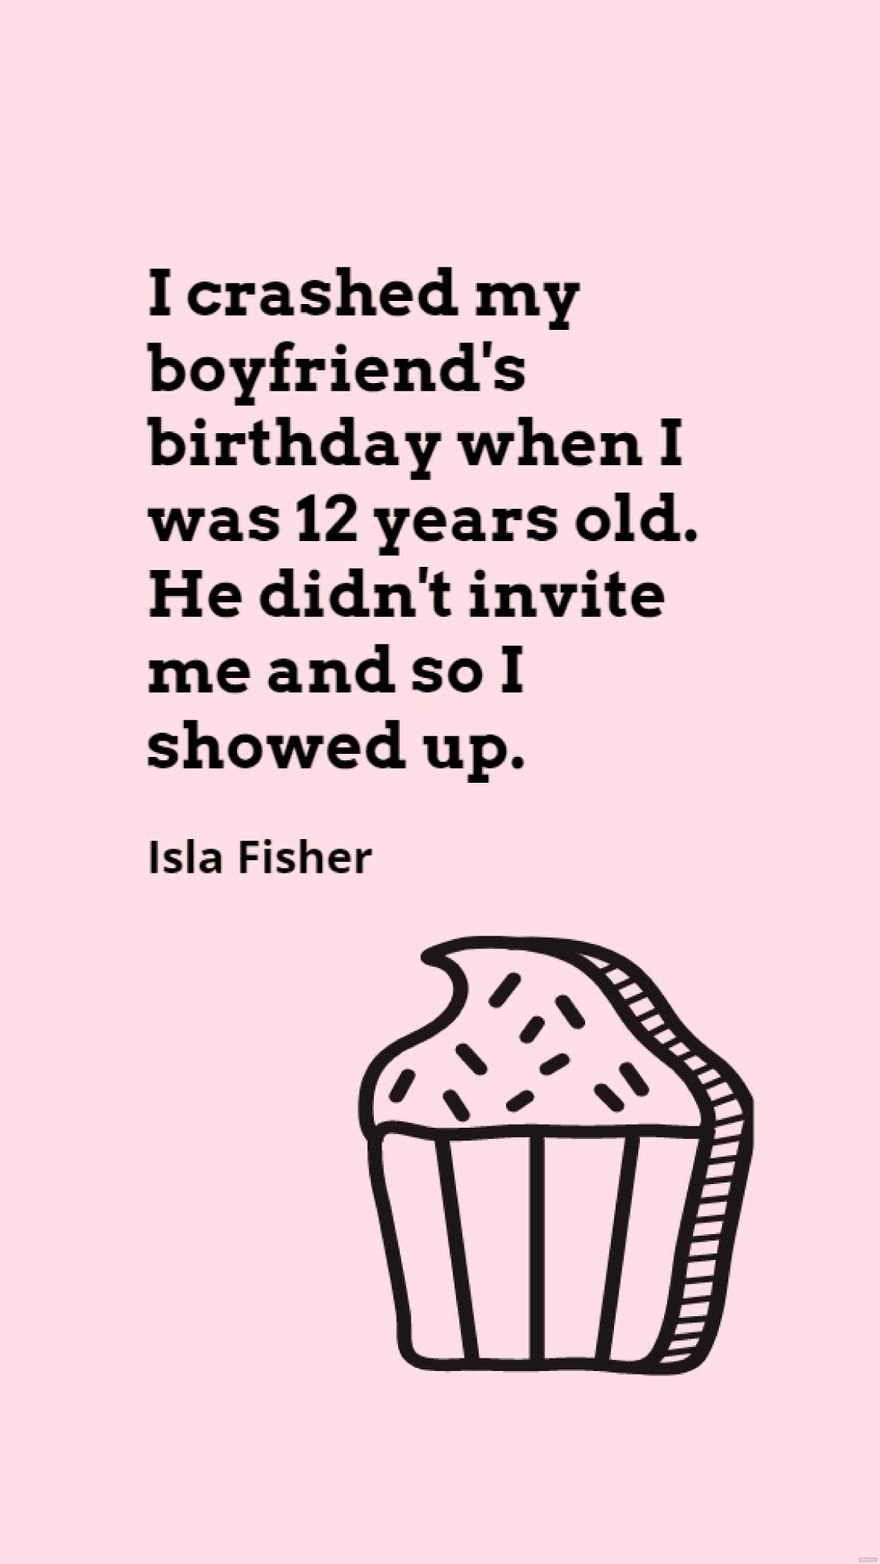 Isla Fisher - I crashed my boyfriend's birthday when I was 12 years old. He didn't invite me and so I showed up. in JPG